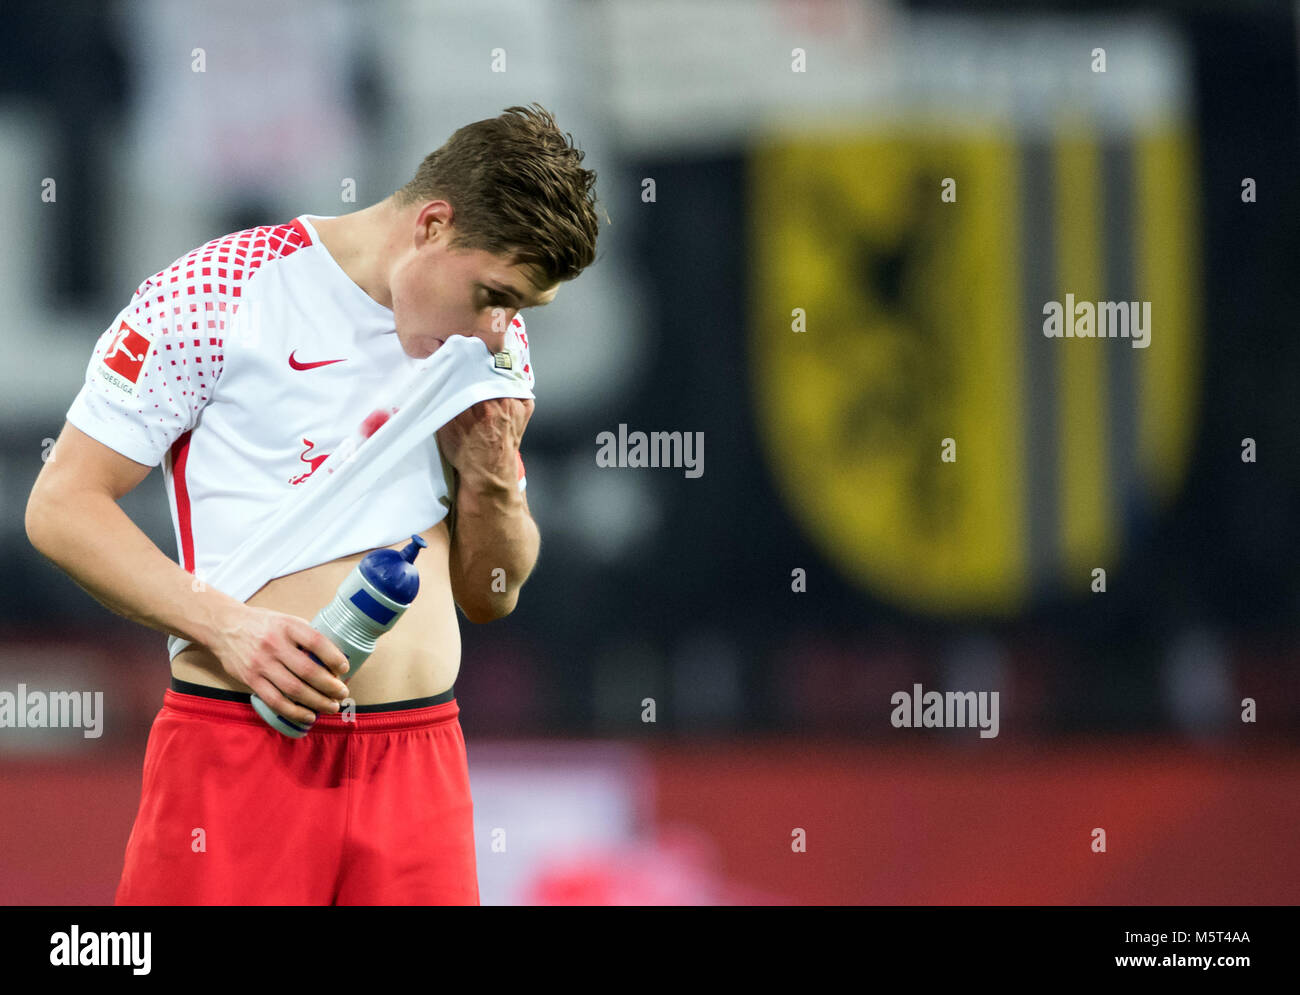 25 Febuary 2018, Germany, Leipzig: German Bundesliga soccer match between RB Leipzig and 1. FC Cologne, Red Bull Arena: Leipzig's Willi Orban after the end of the match. Photo: Soeren Stache/dpa - Nutzung nur nach vertraglicher Vereinbarung Stock Photo